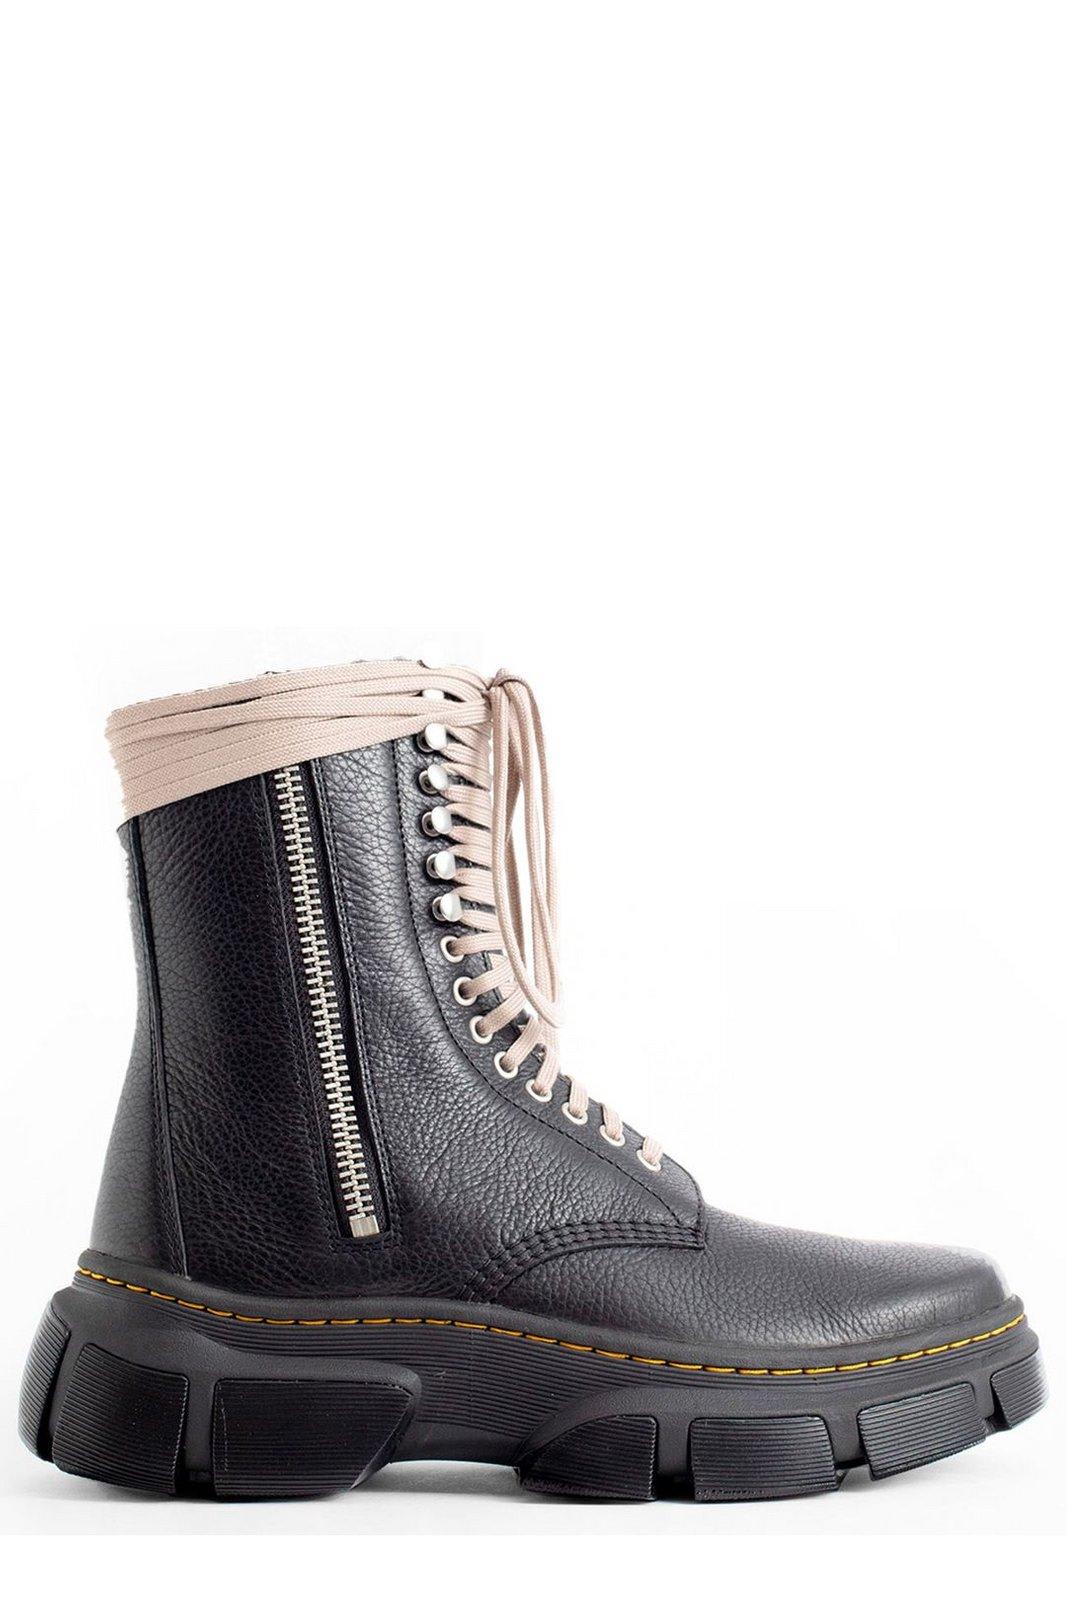 Shop Rick Owens X Dr. Martens Chunky Sole Lace-up Boots In Black 09